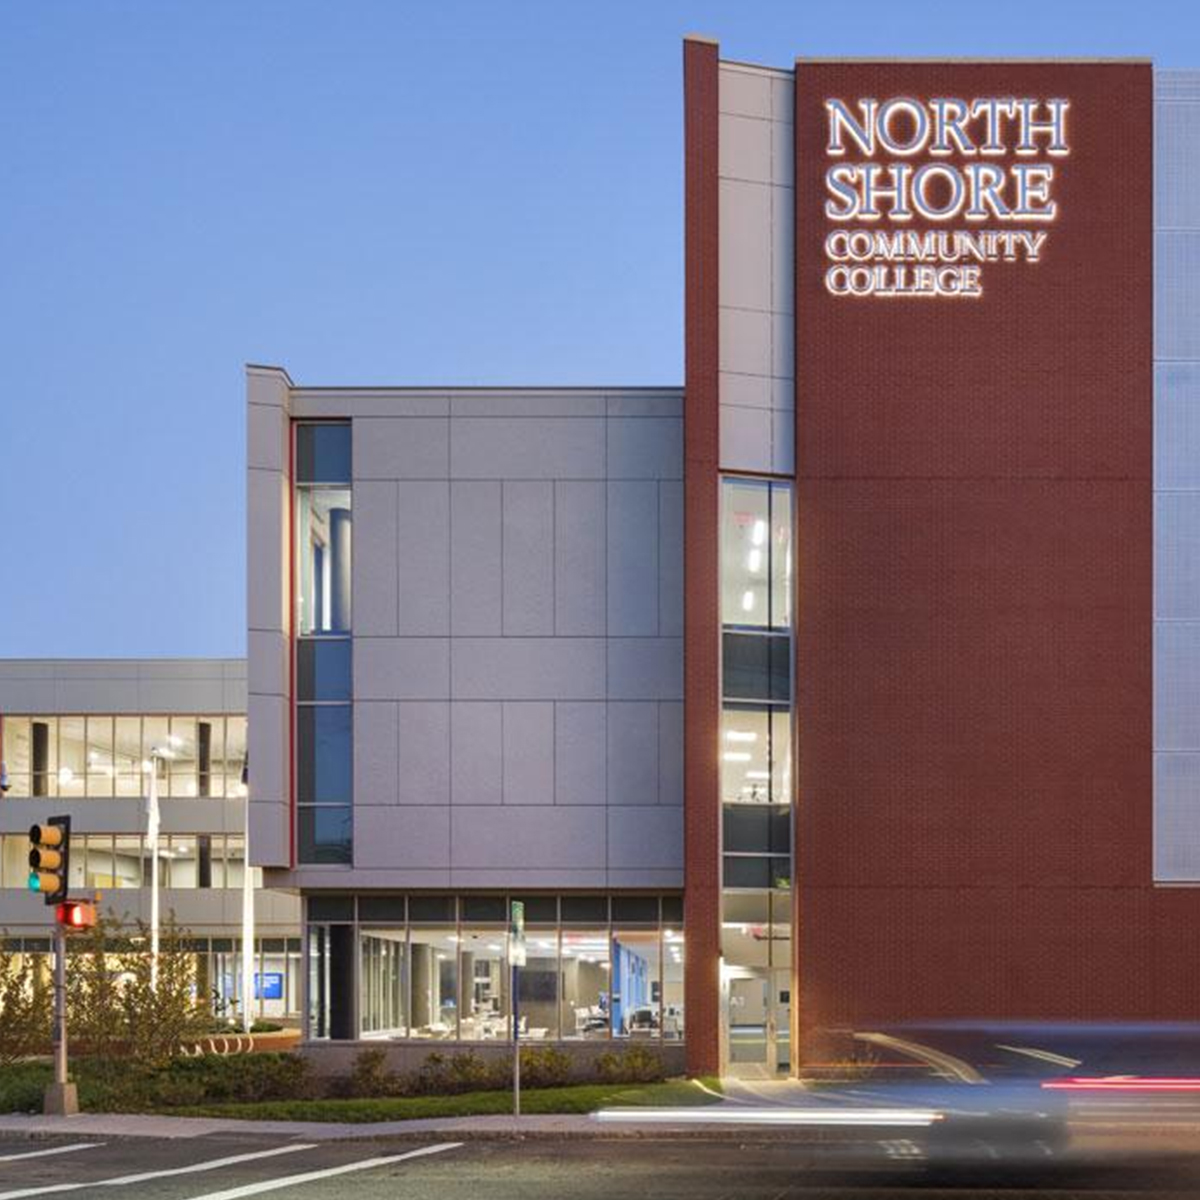 a car drives past a building with a sign that says north shore community college.